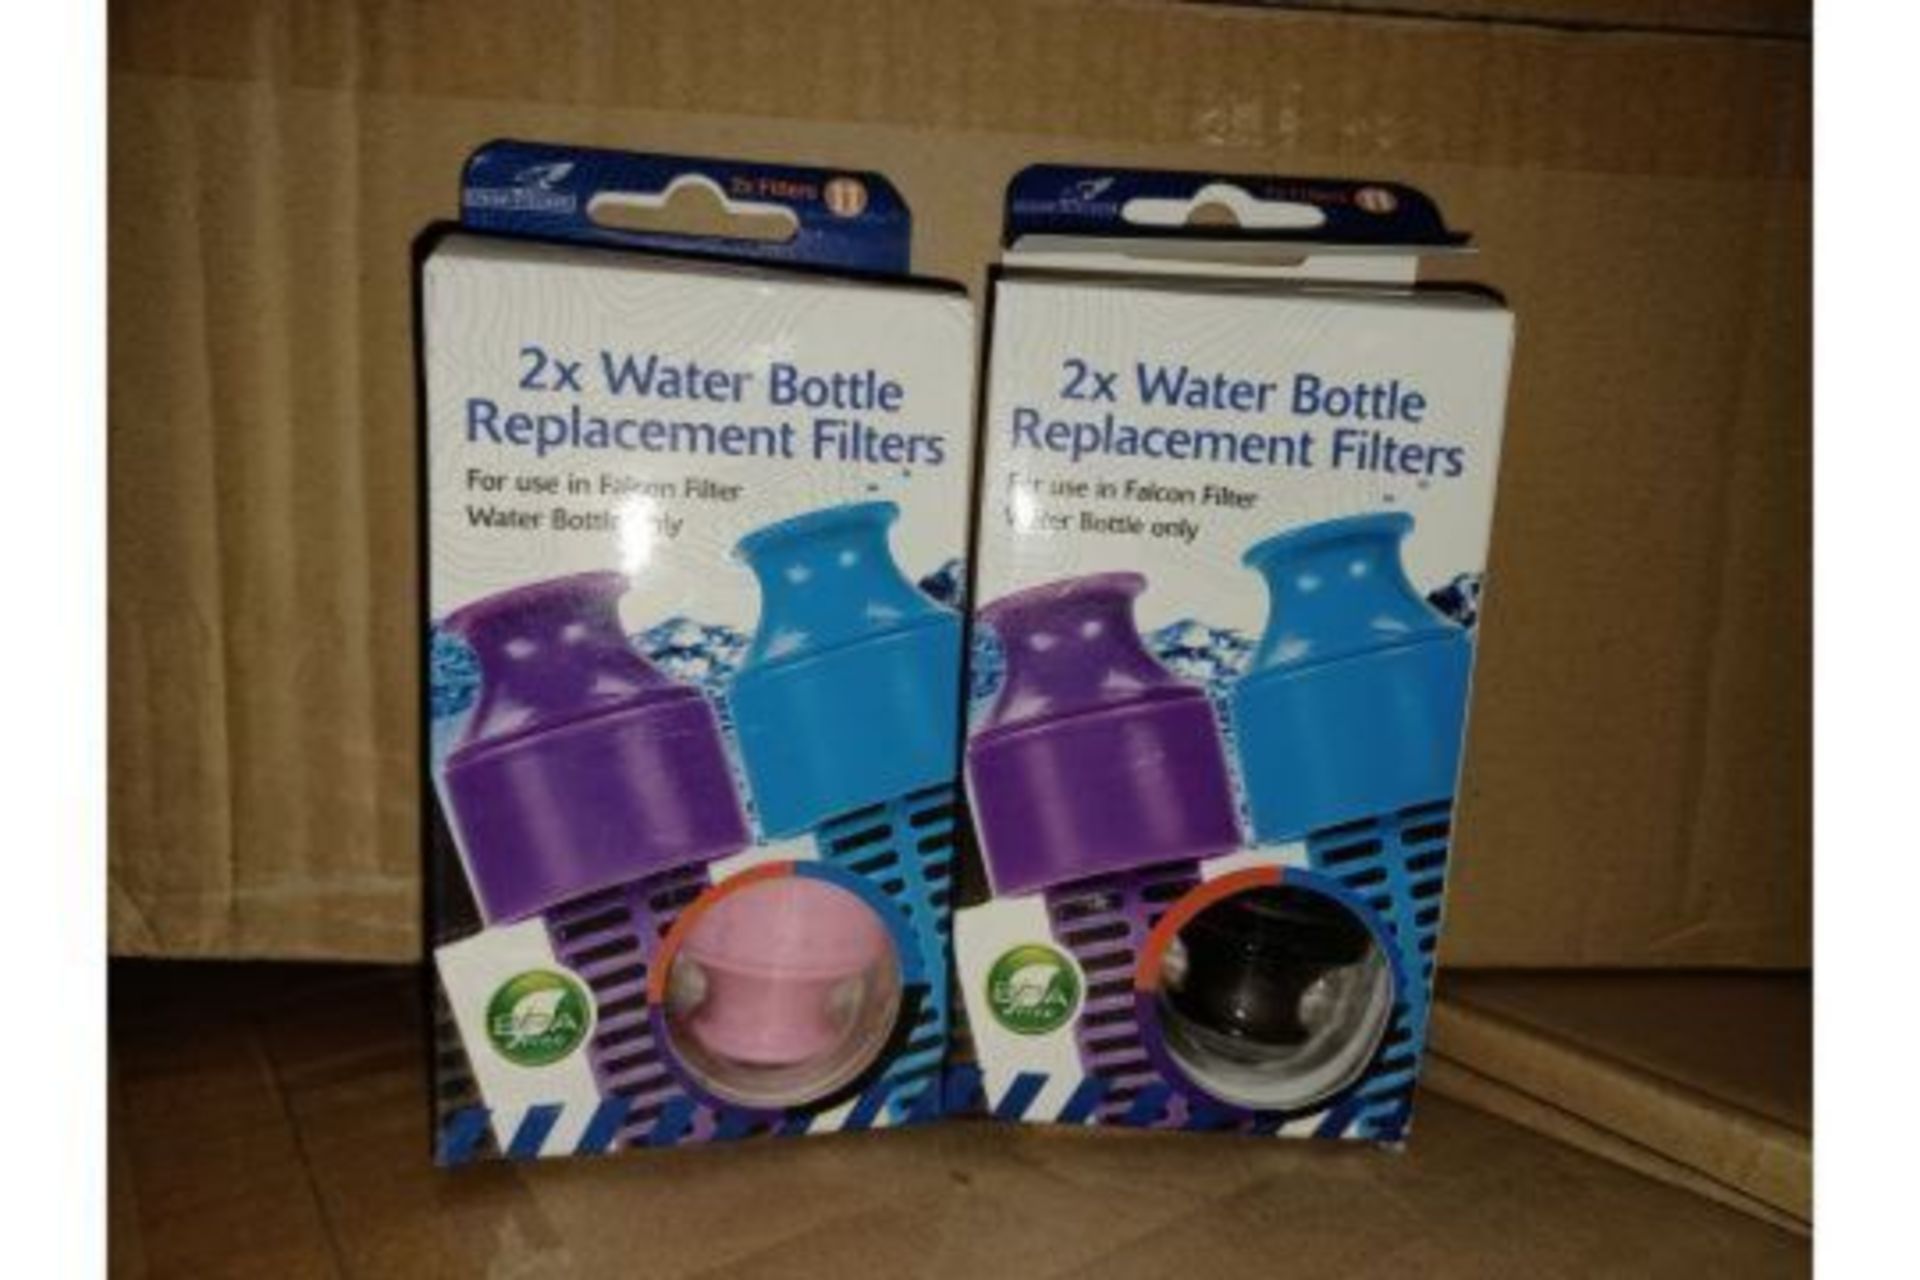 100 X BRAND NEW FALCON PACKS OF 2 WATER BOTTLE REPLACEMENT FILTERS R18-9